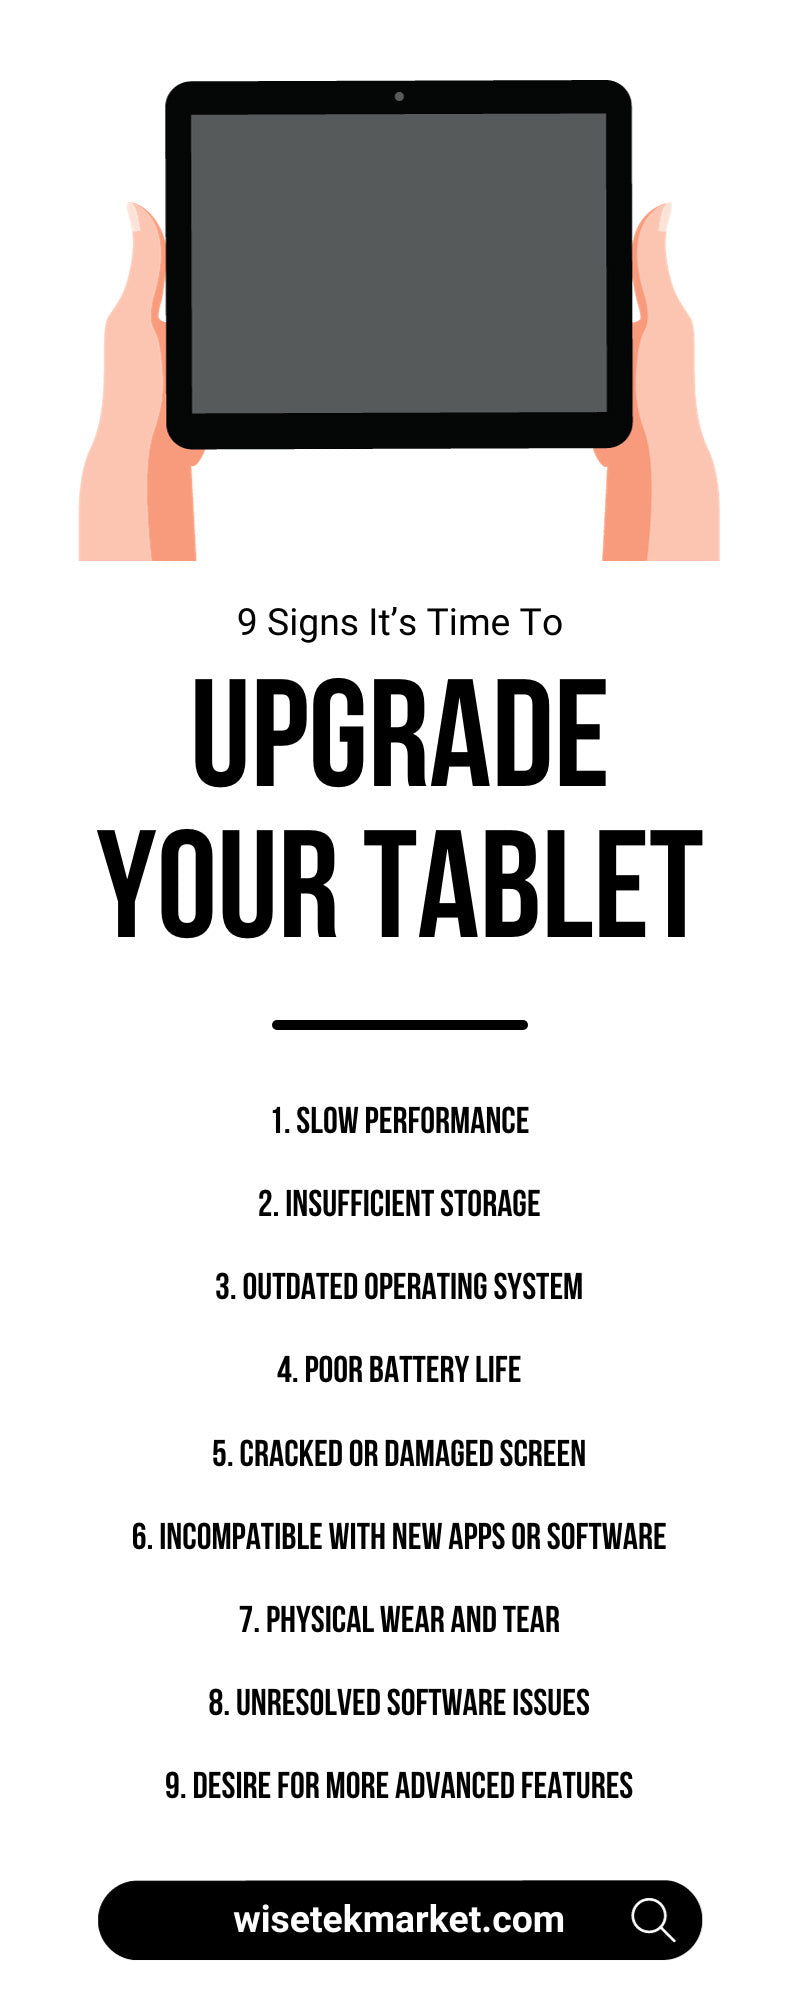 9 Signs It’s Time To Upgrade Your Tablet